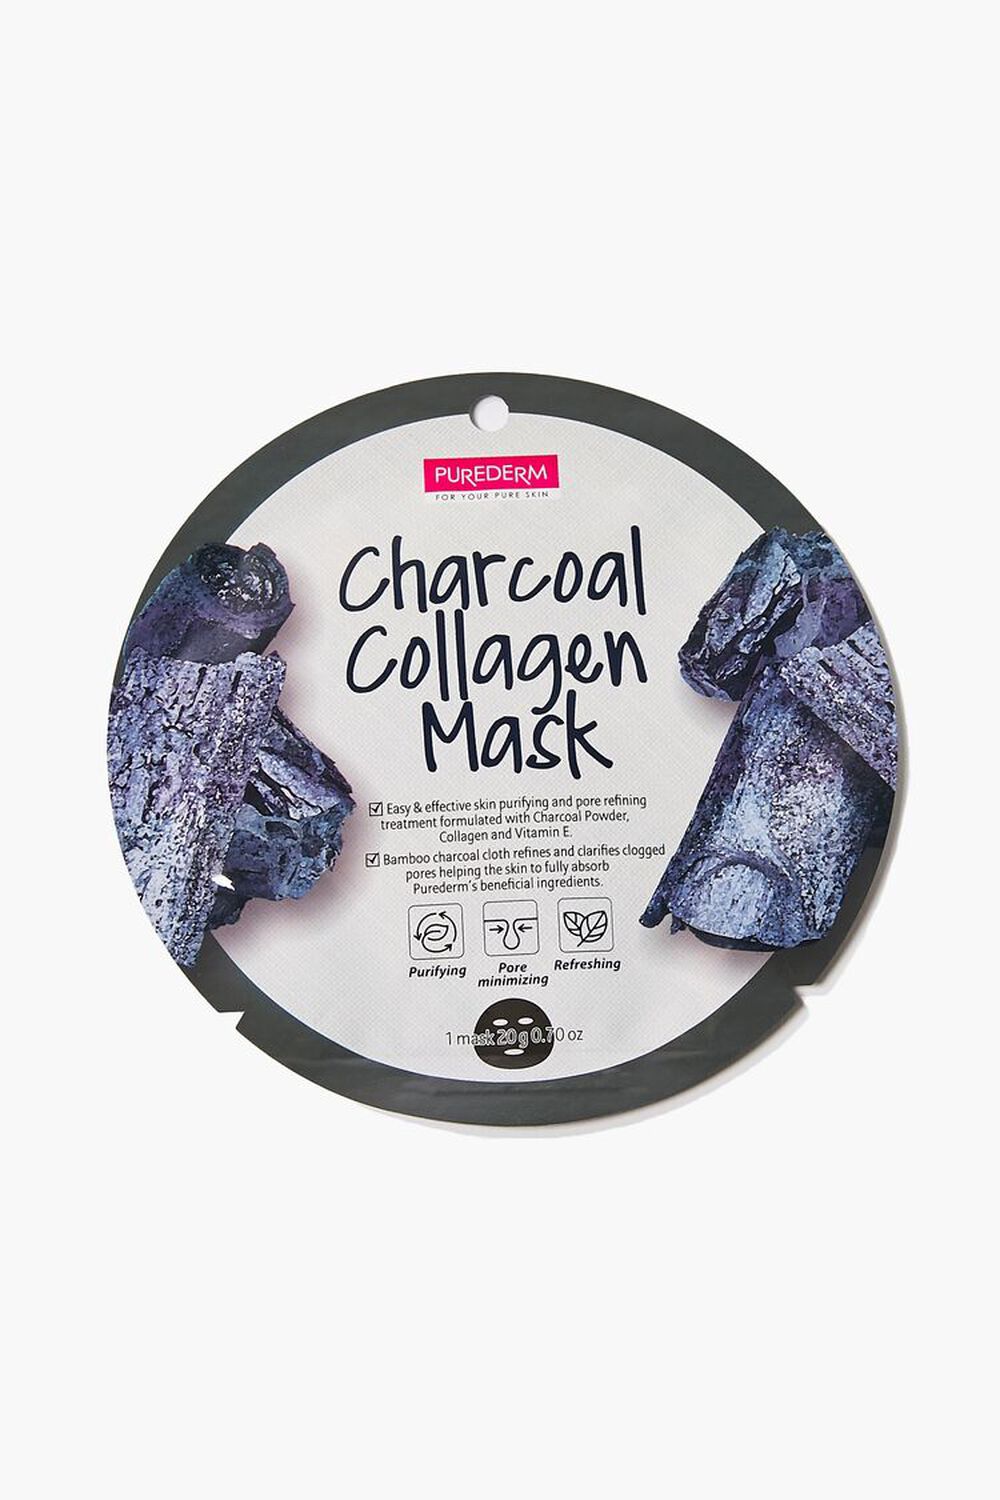 GREEN Purederm Charcoal Collagen Face Mask, image 1